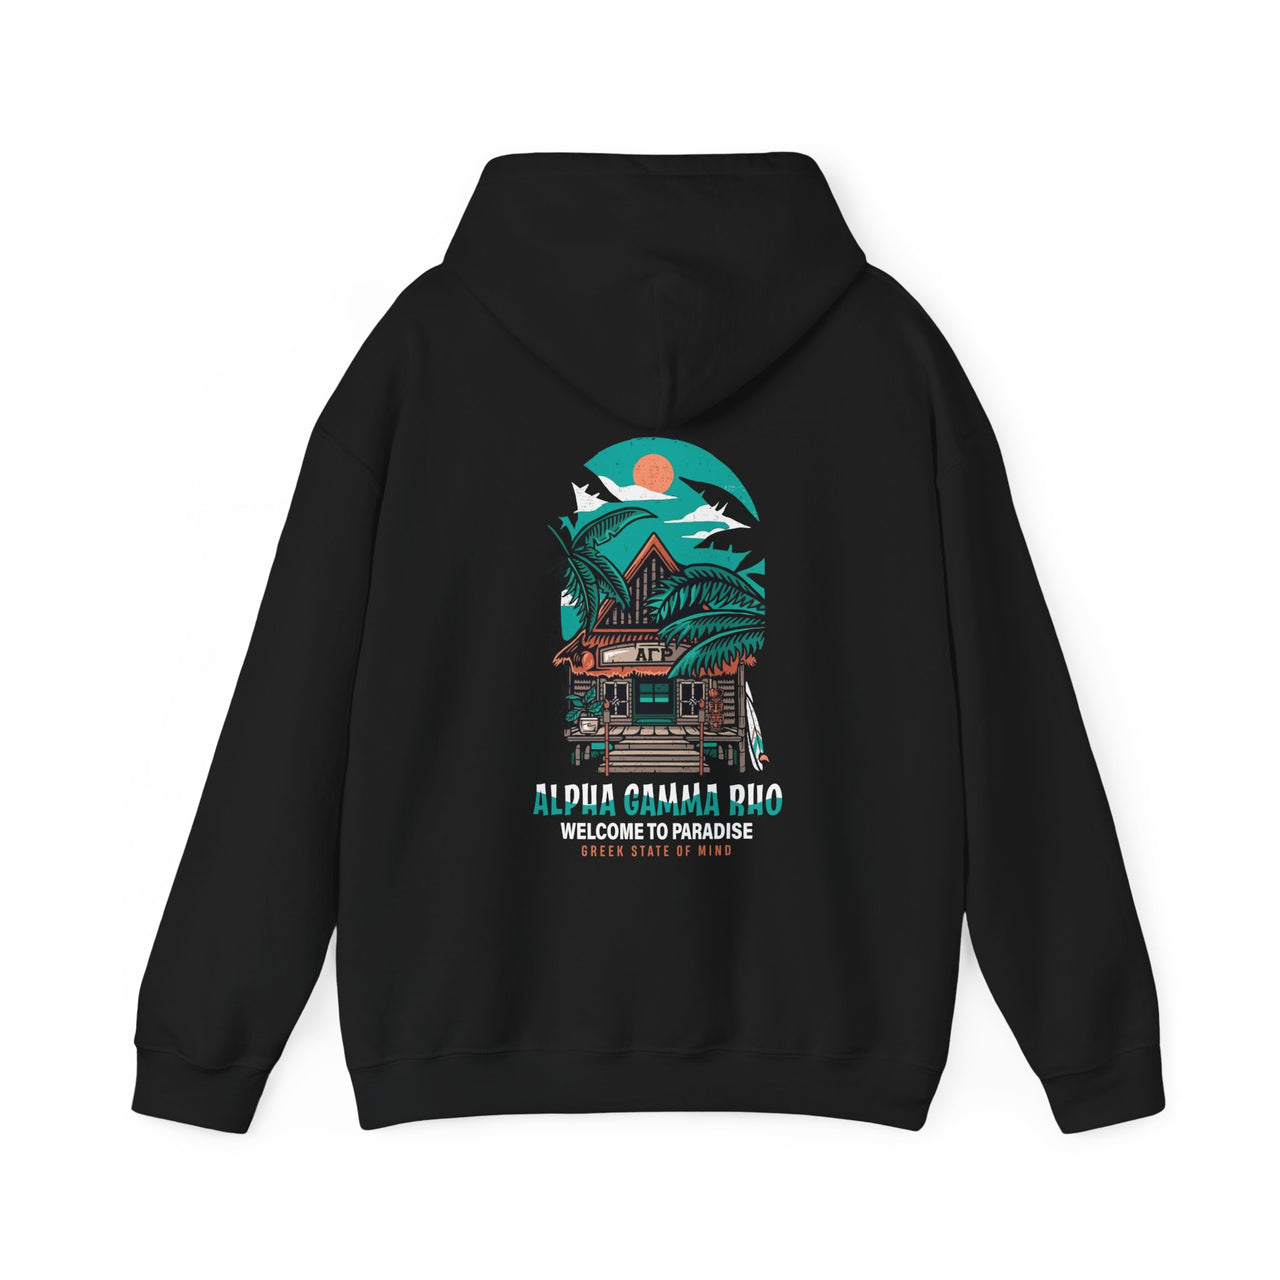 Alpha Gamma Rho Graphic Hoodie | Welcome to Paradise